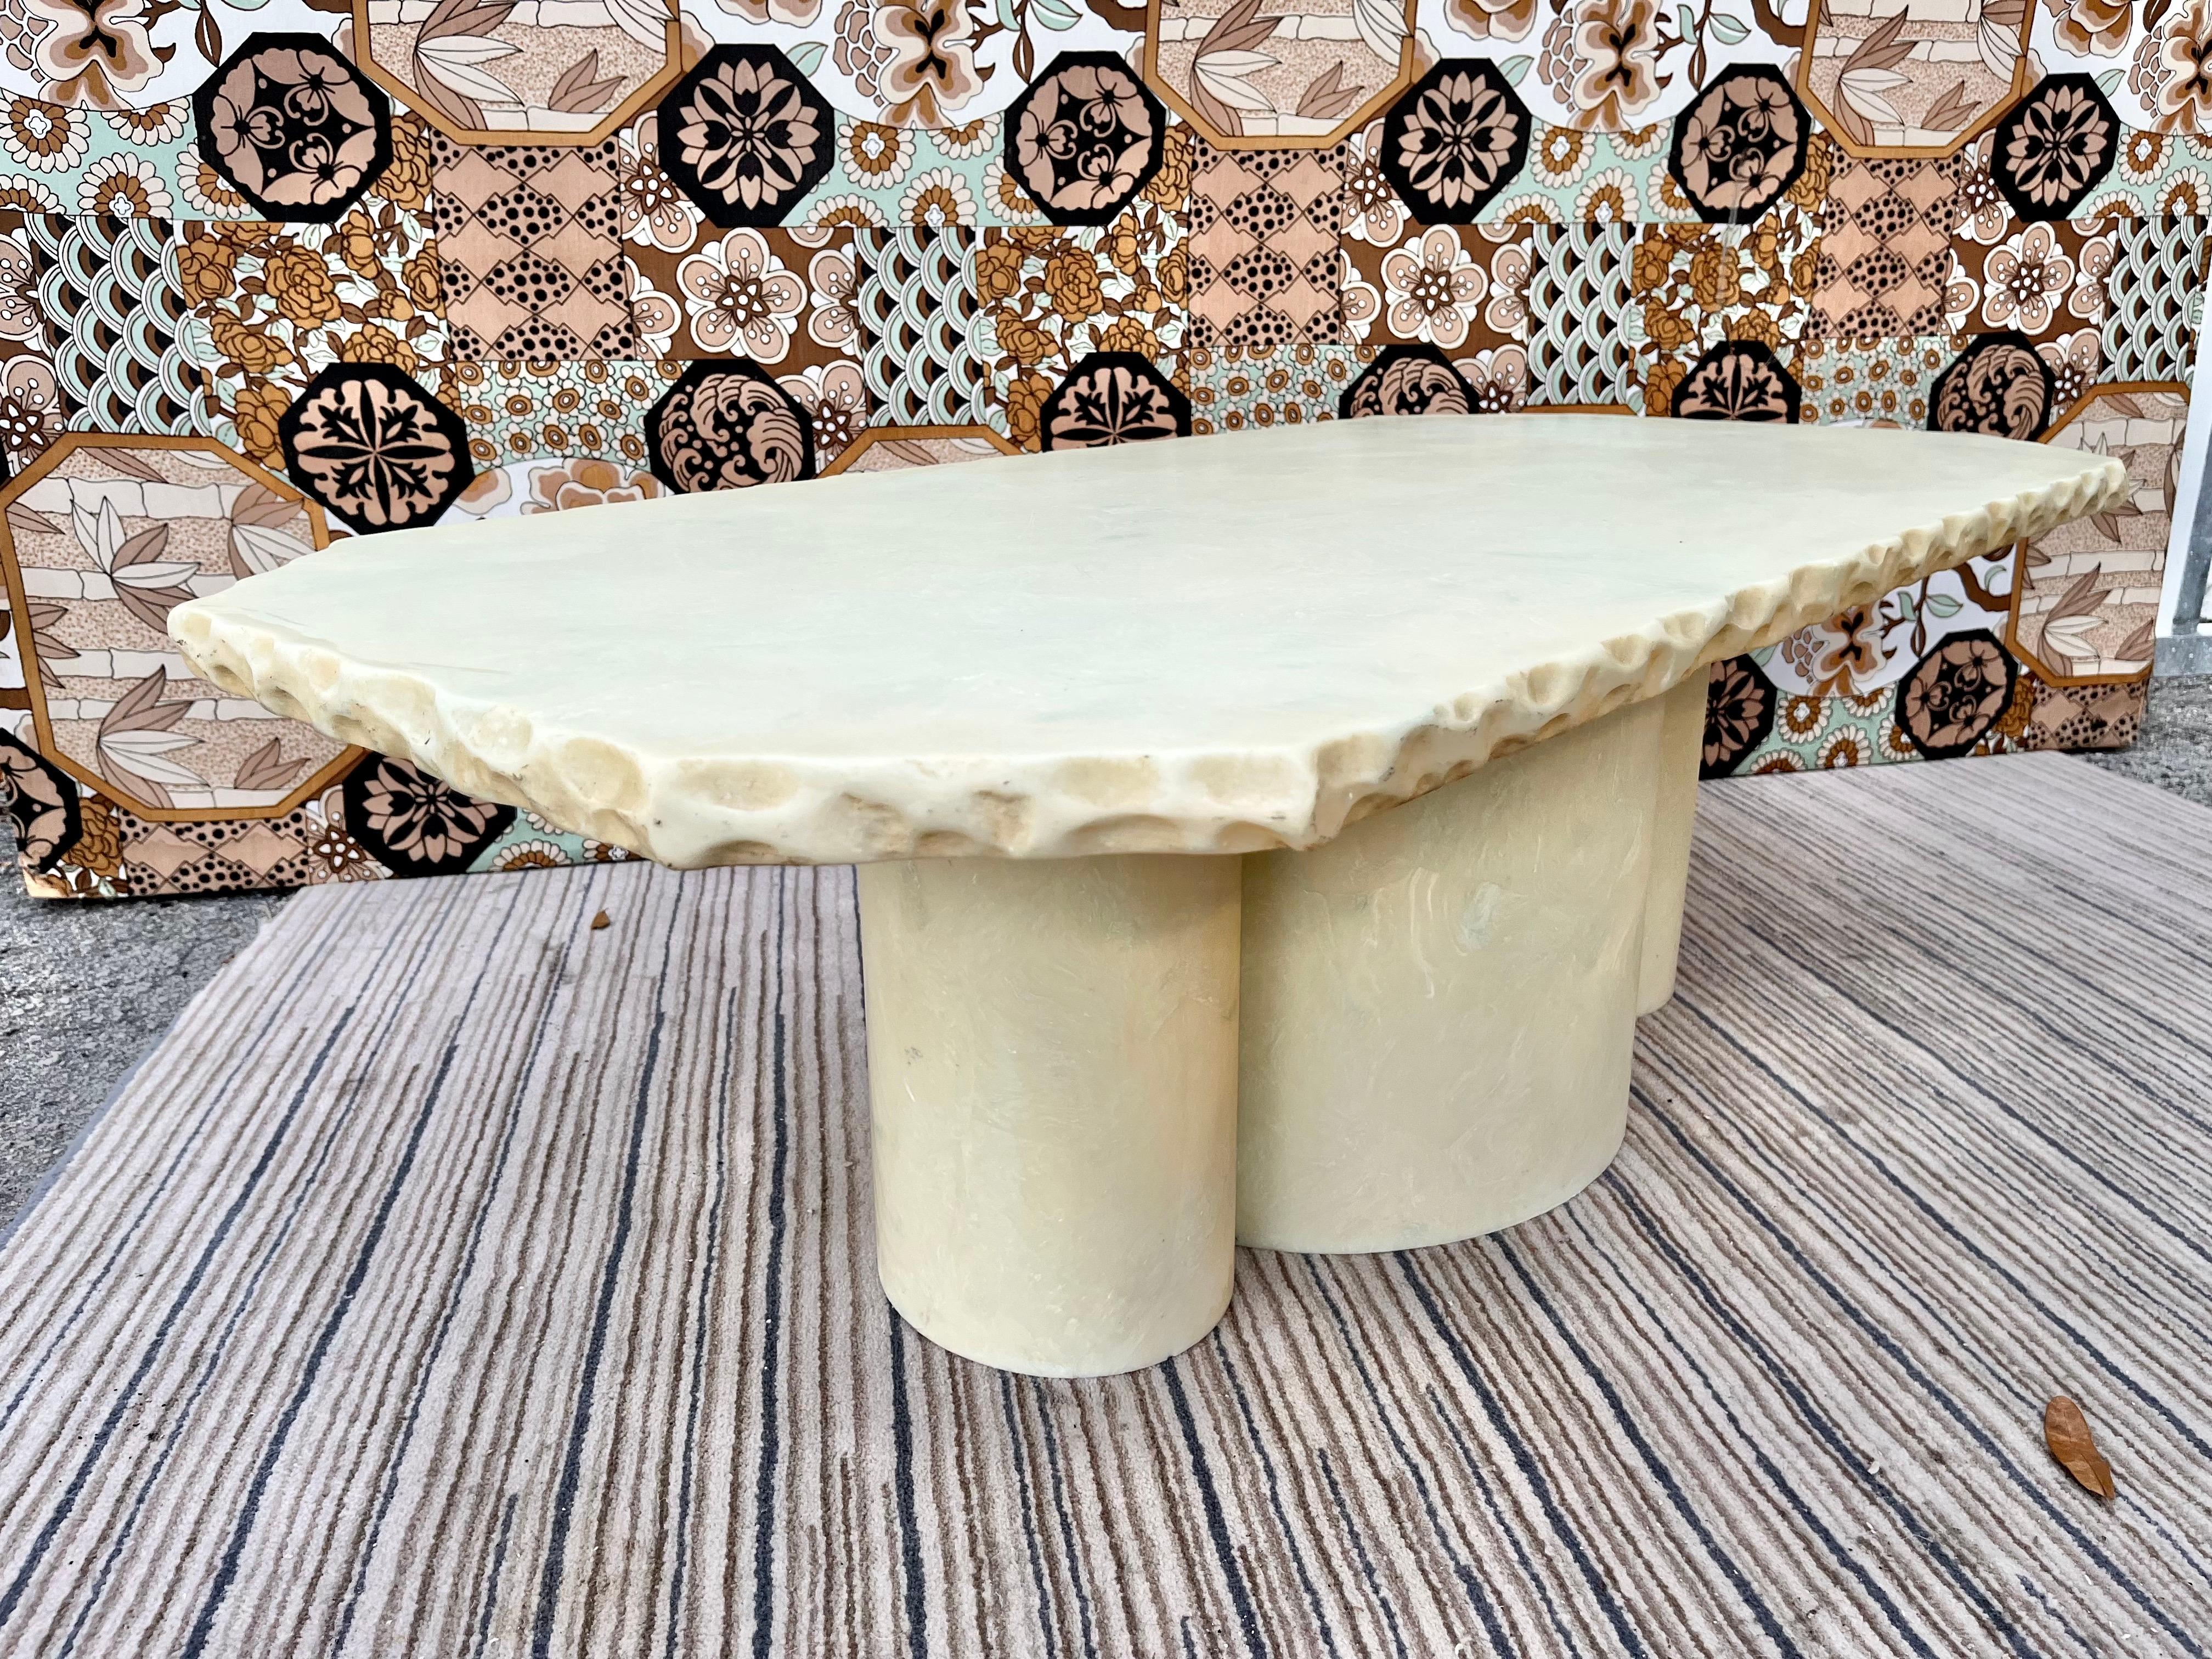 American 1980s Postmodern Faux Marble Resin Handcrafted Coffee Table For Sale